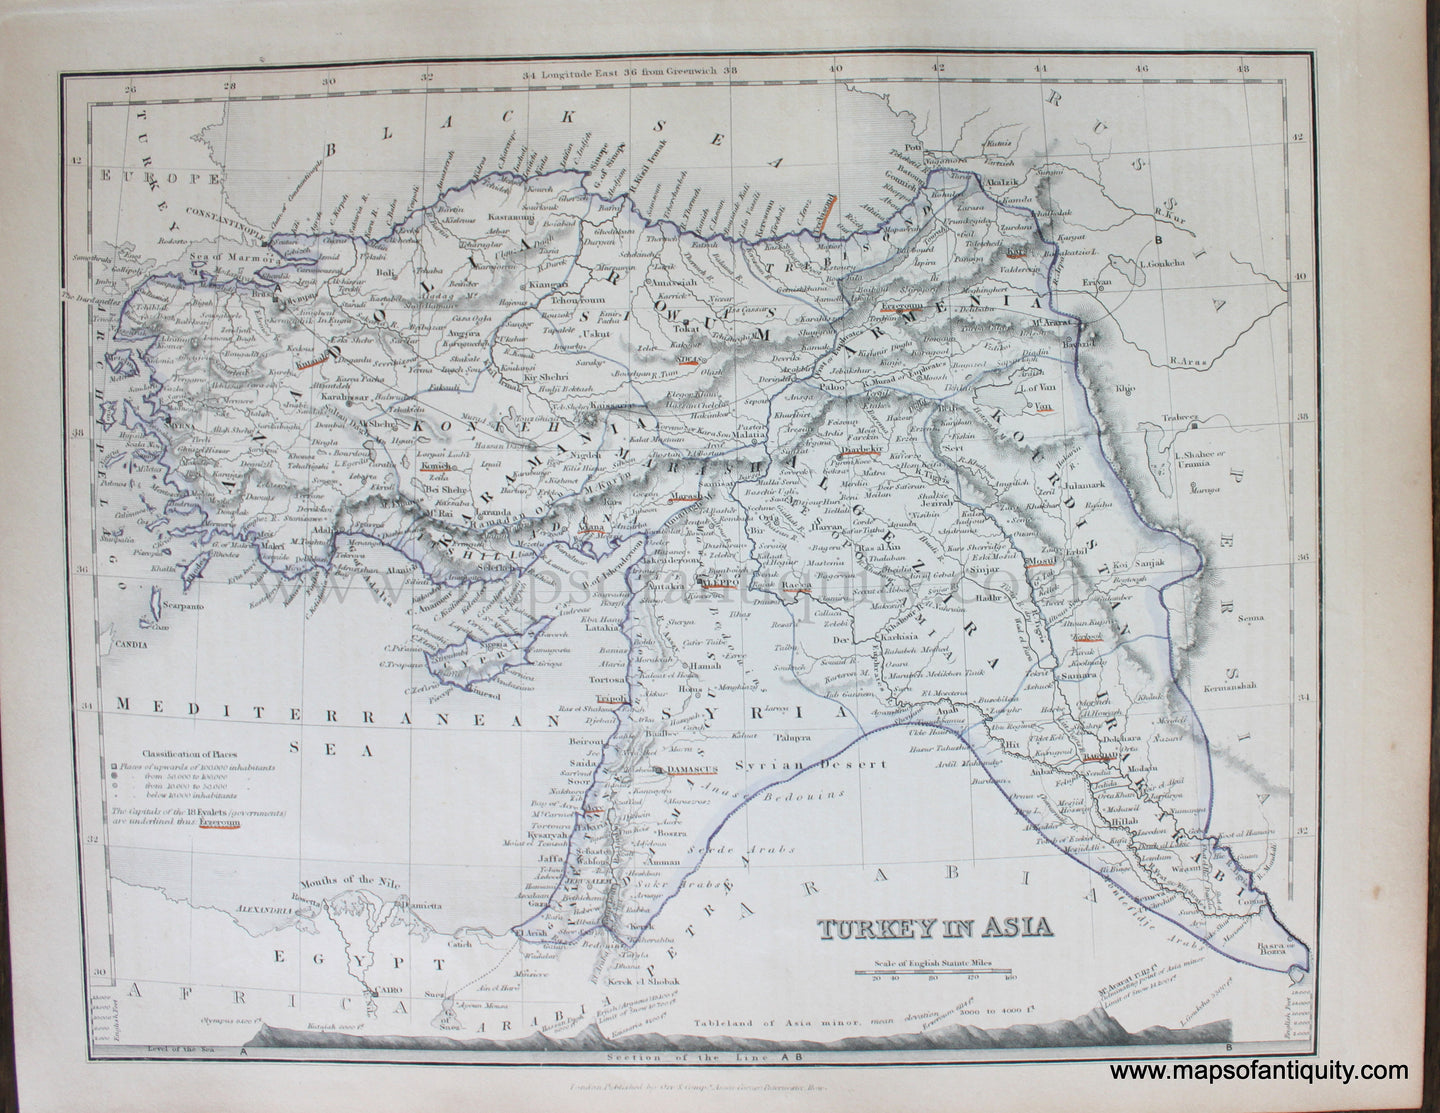 Genuine-Antique-Map-Turkey-in-Asia-Asia--1850-Petermann-/-Orr-/-Dower-Maps-Of-Antiquity-1800s-19th-century